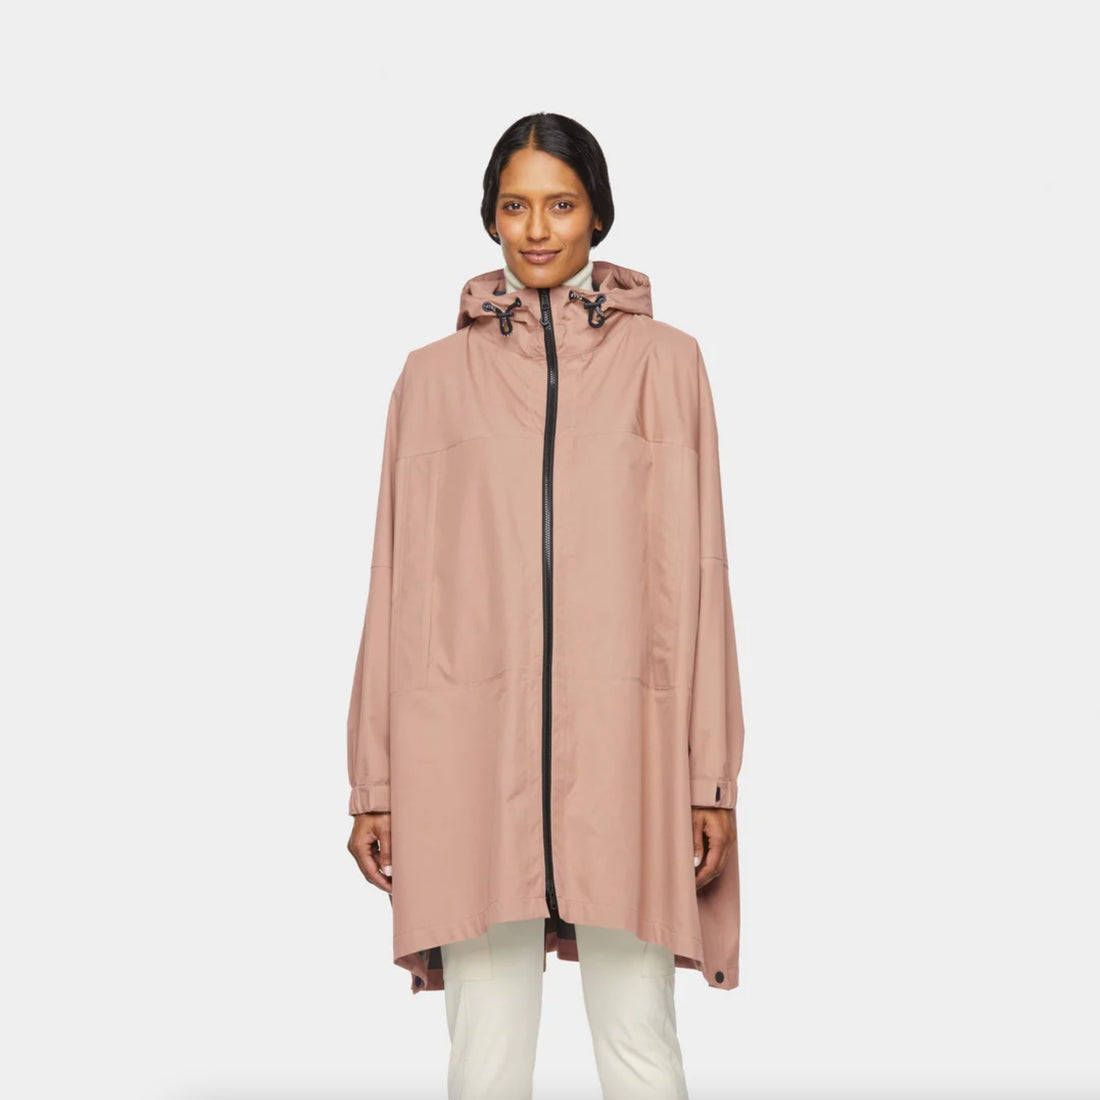 Tilley - Unisex Packable Hooded Poncho - The Flower Crate